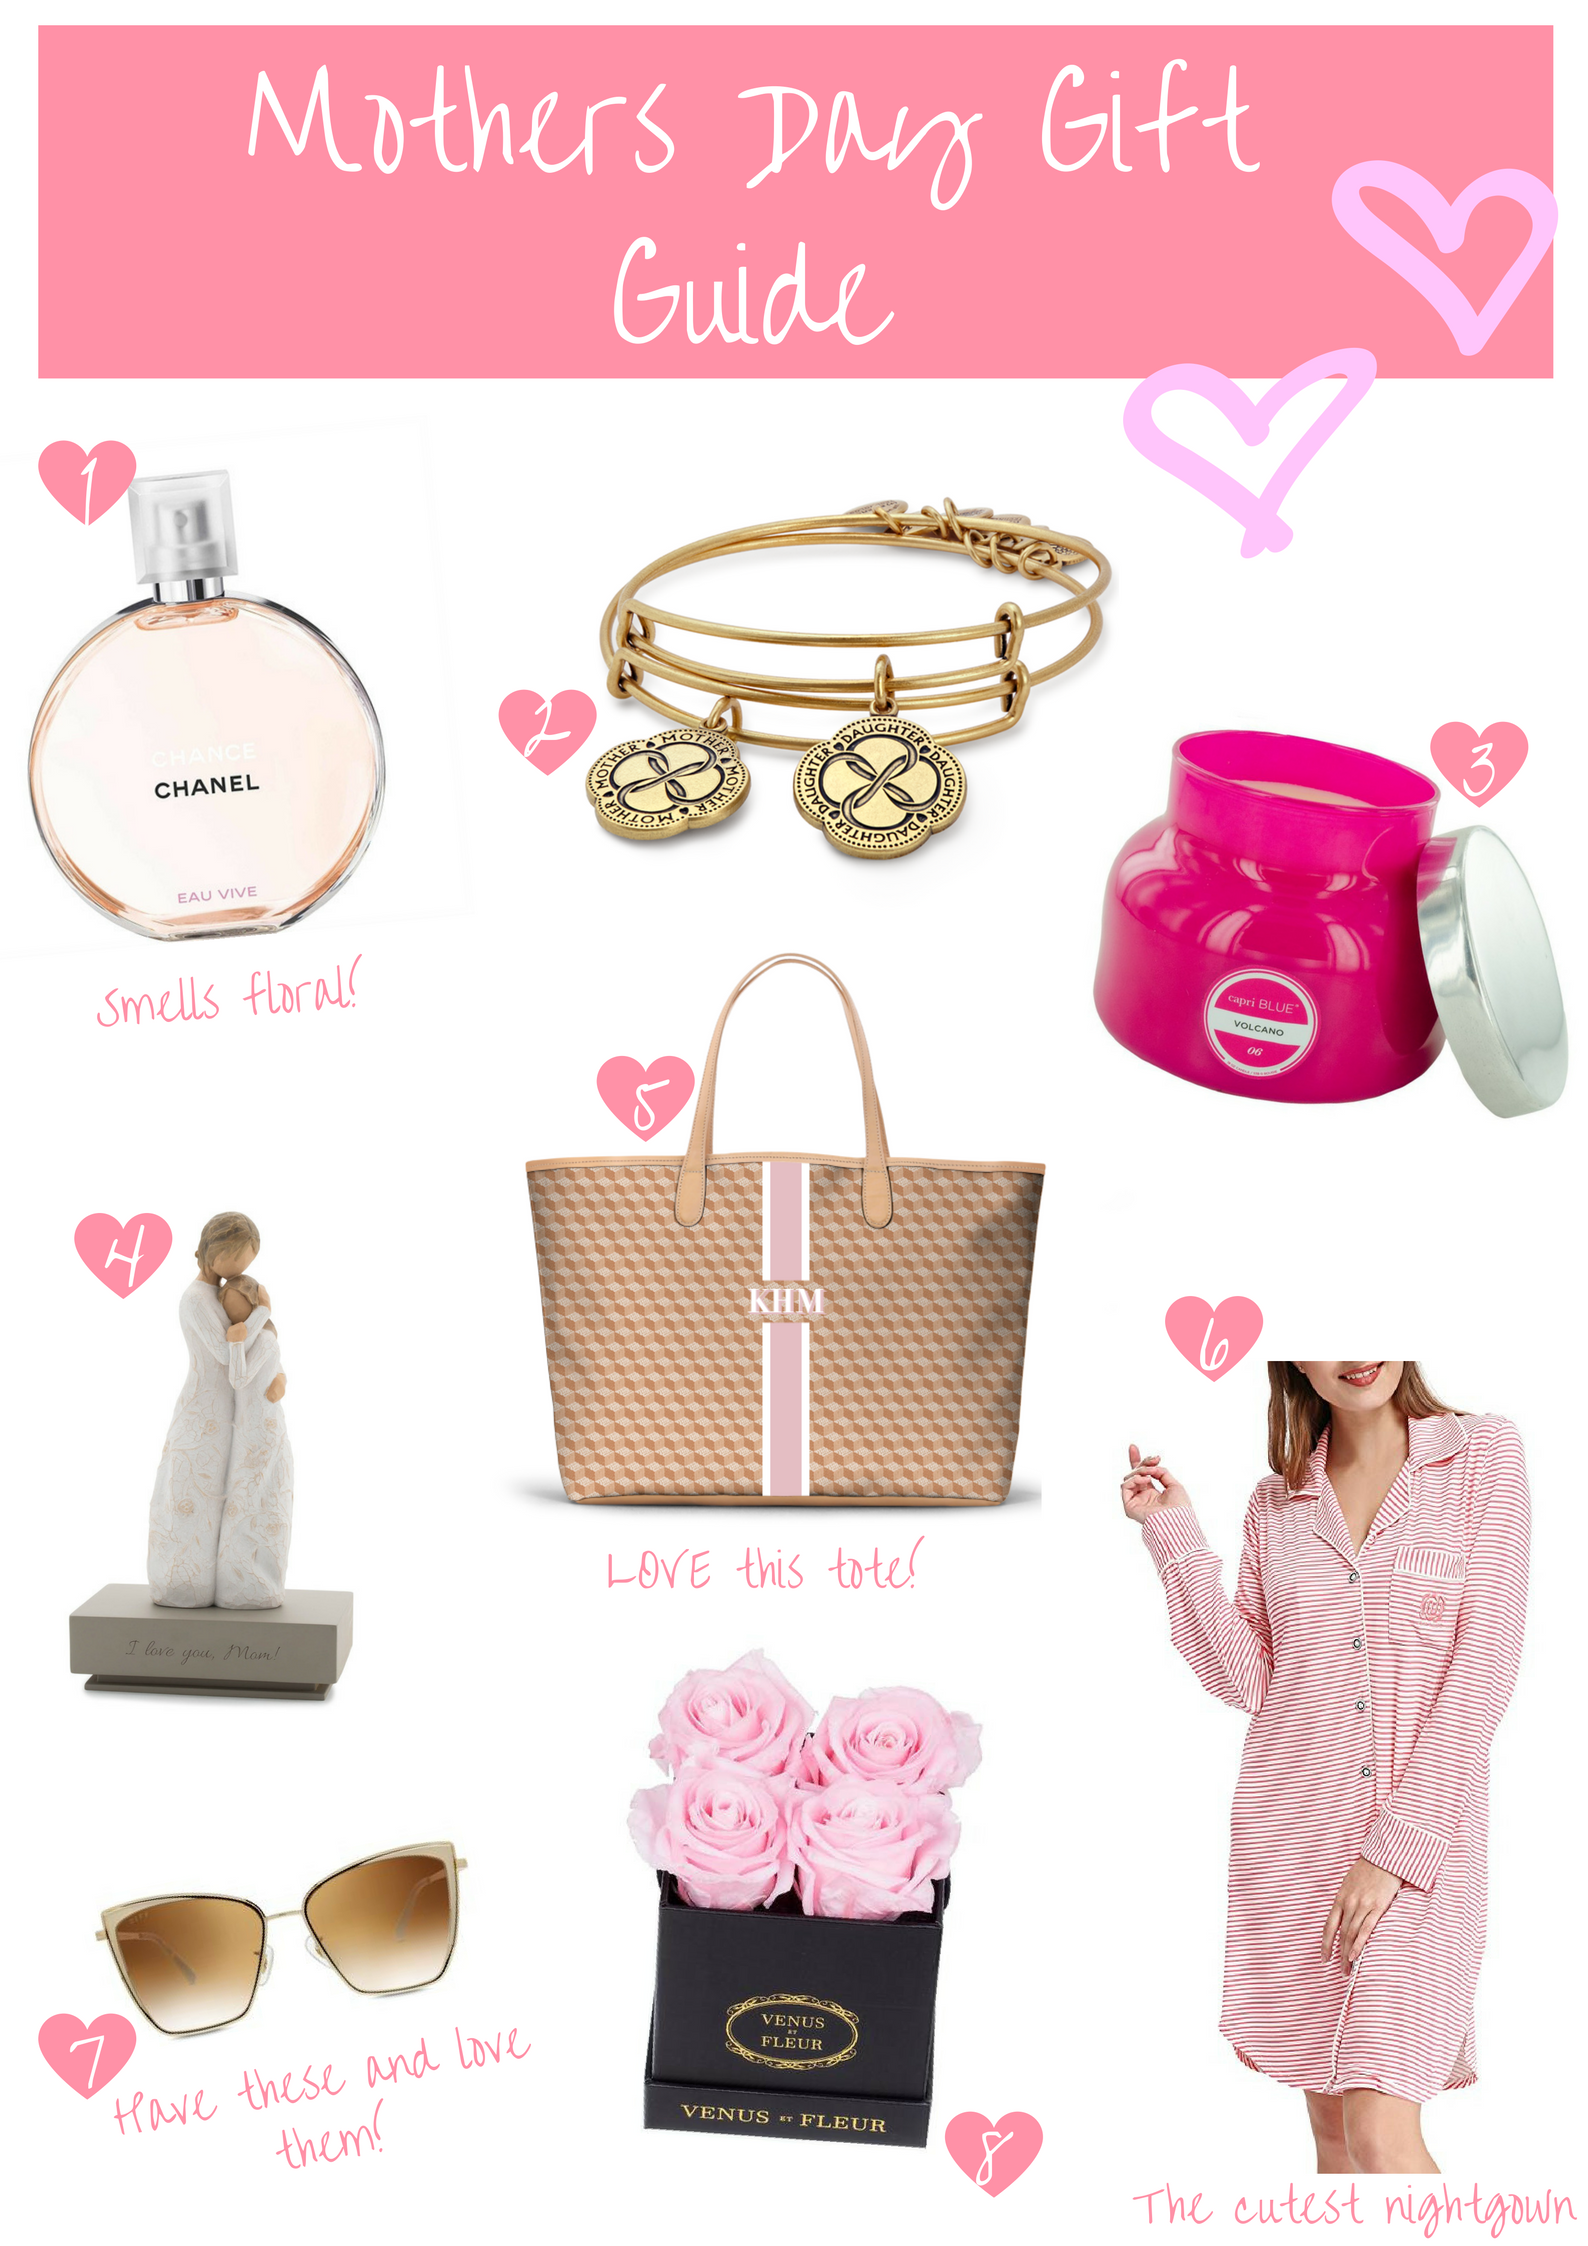 8 Sentimental Gift Ideas Your Mom Will Love For Mother’s Day!